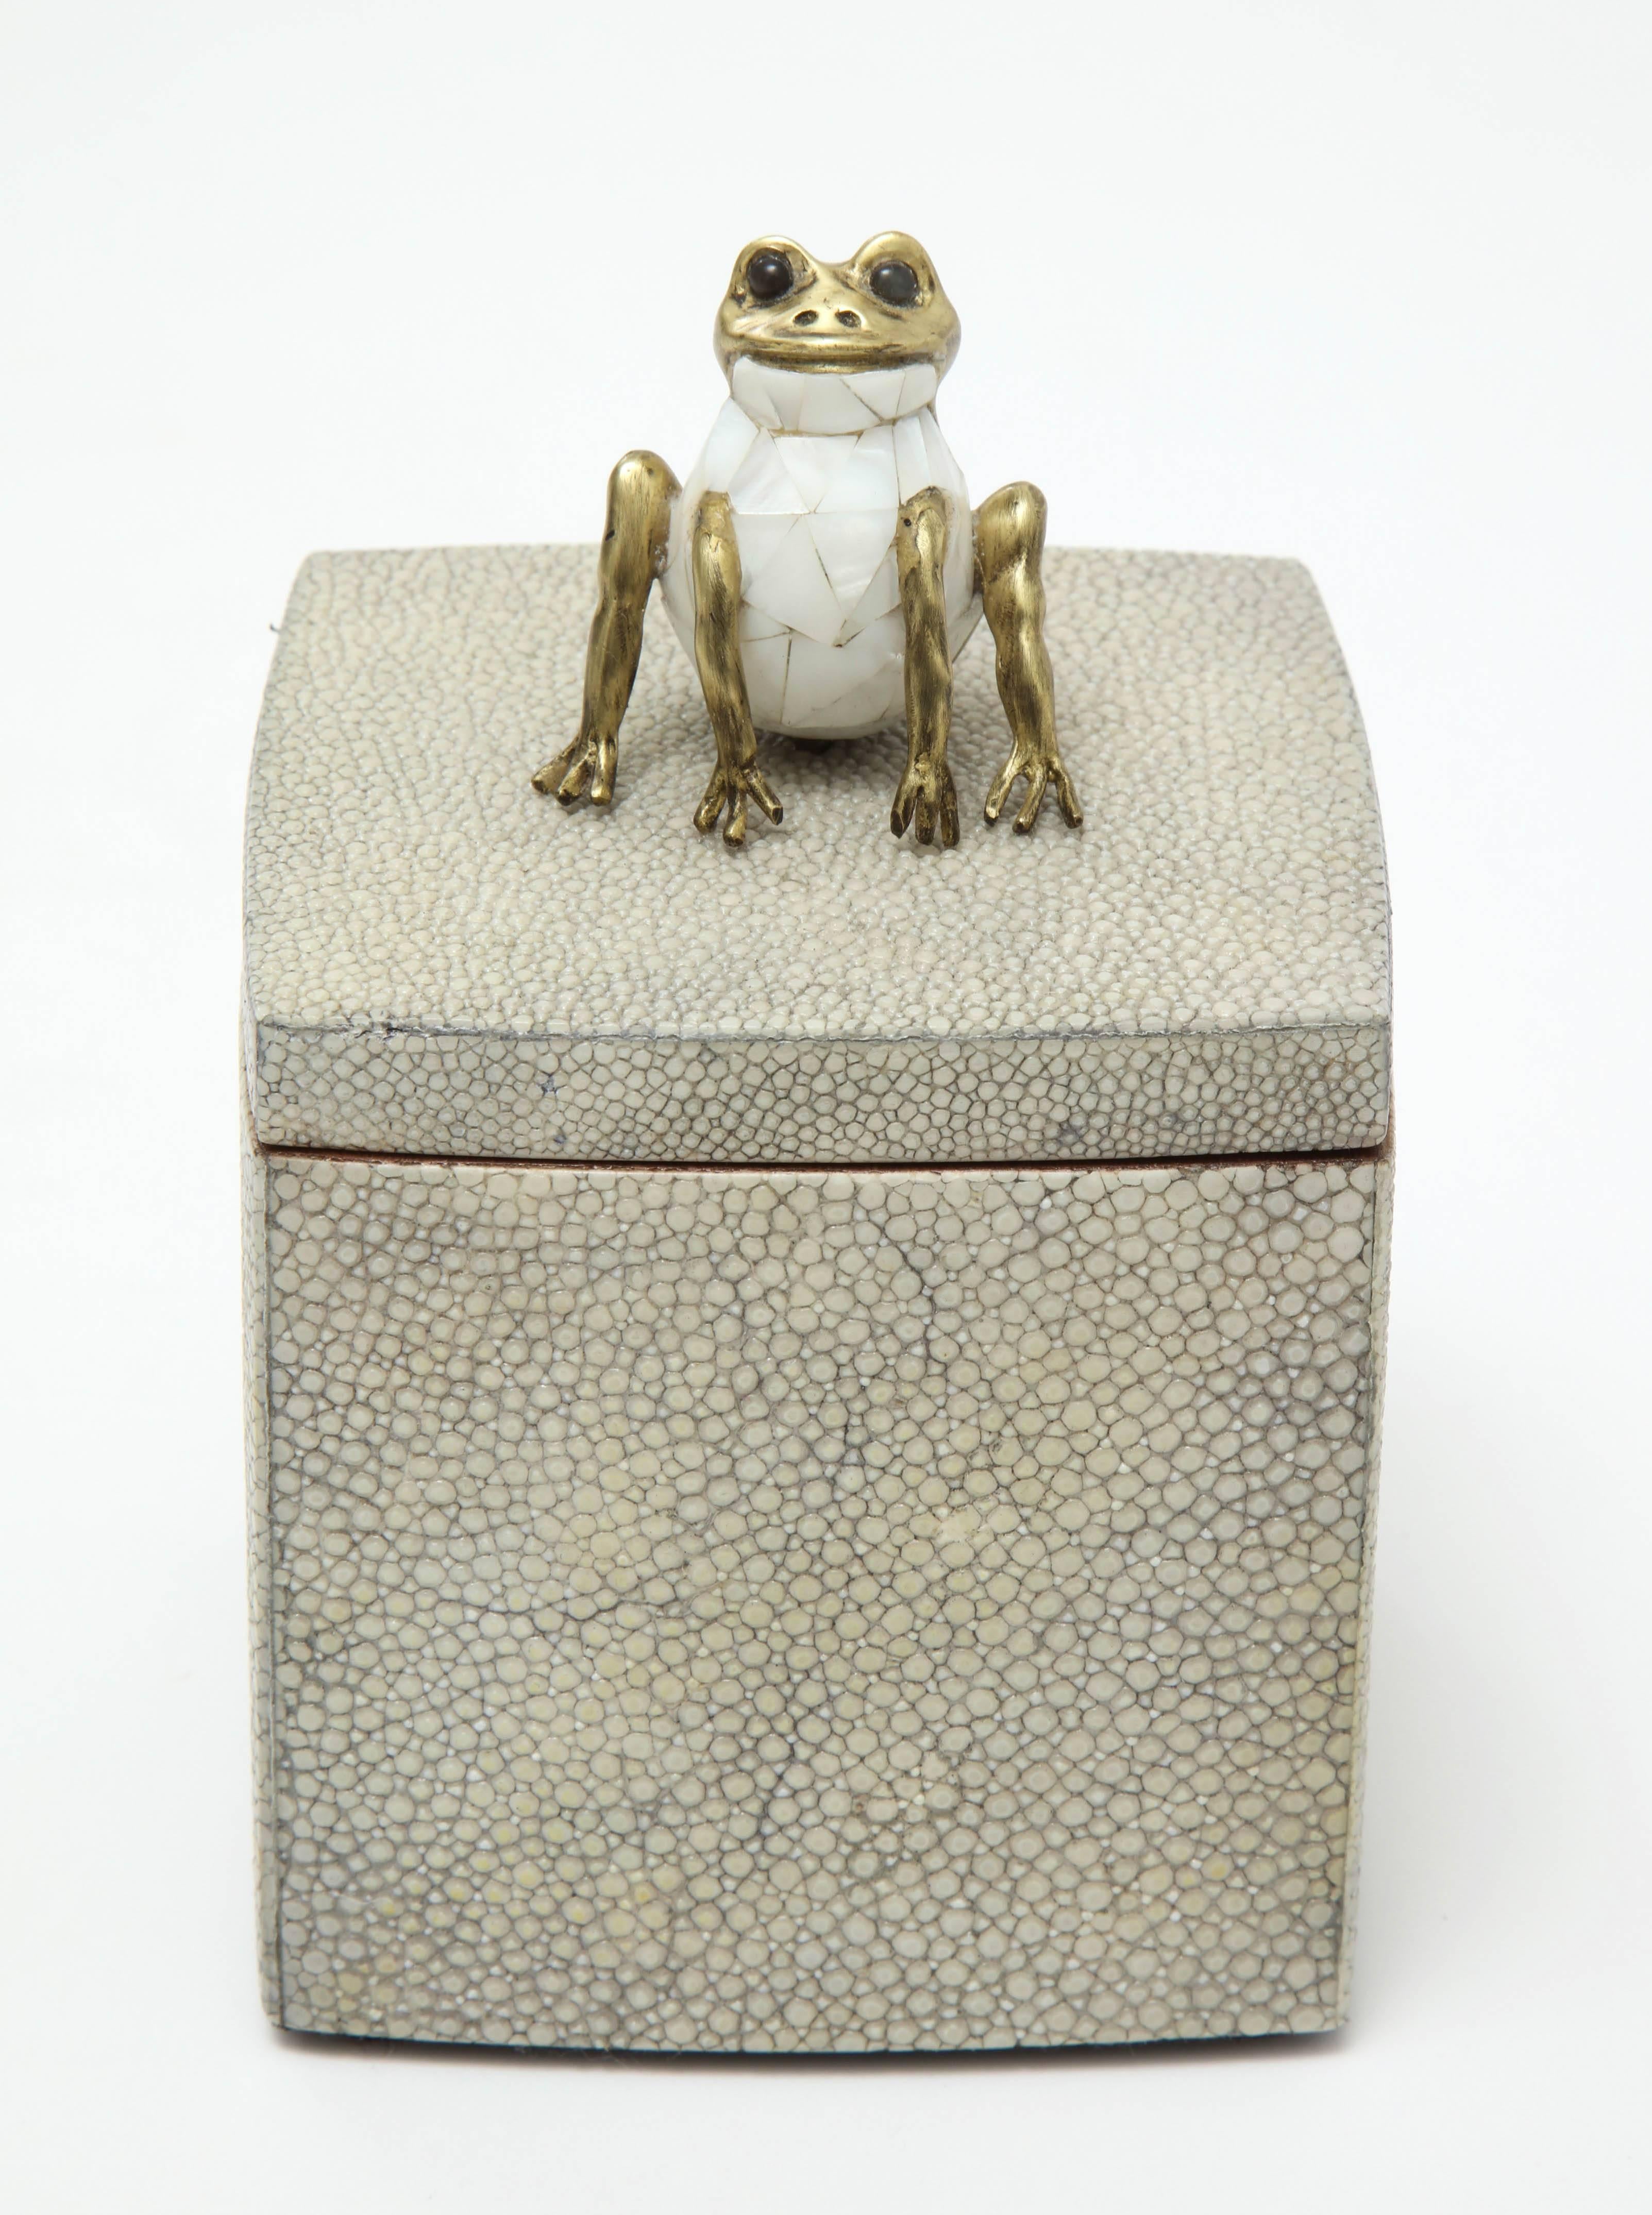 Decorative shagreen box with frog on top. Designed in France. Delivery time is about 8-10 weeks.